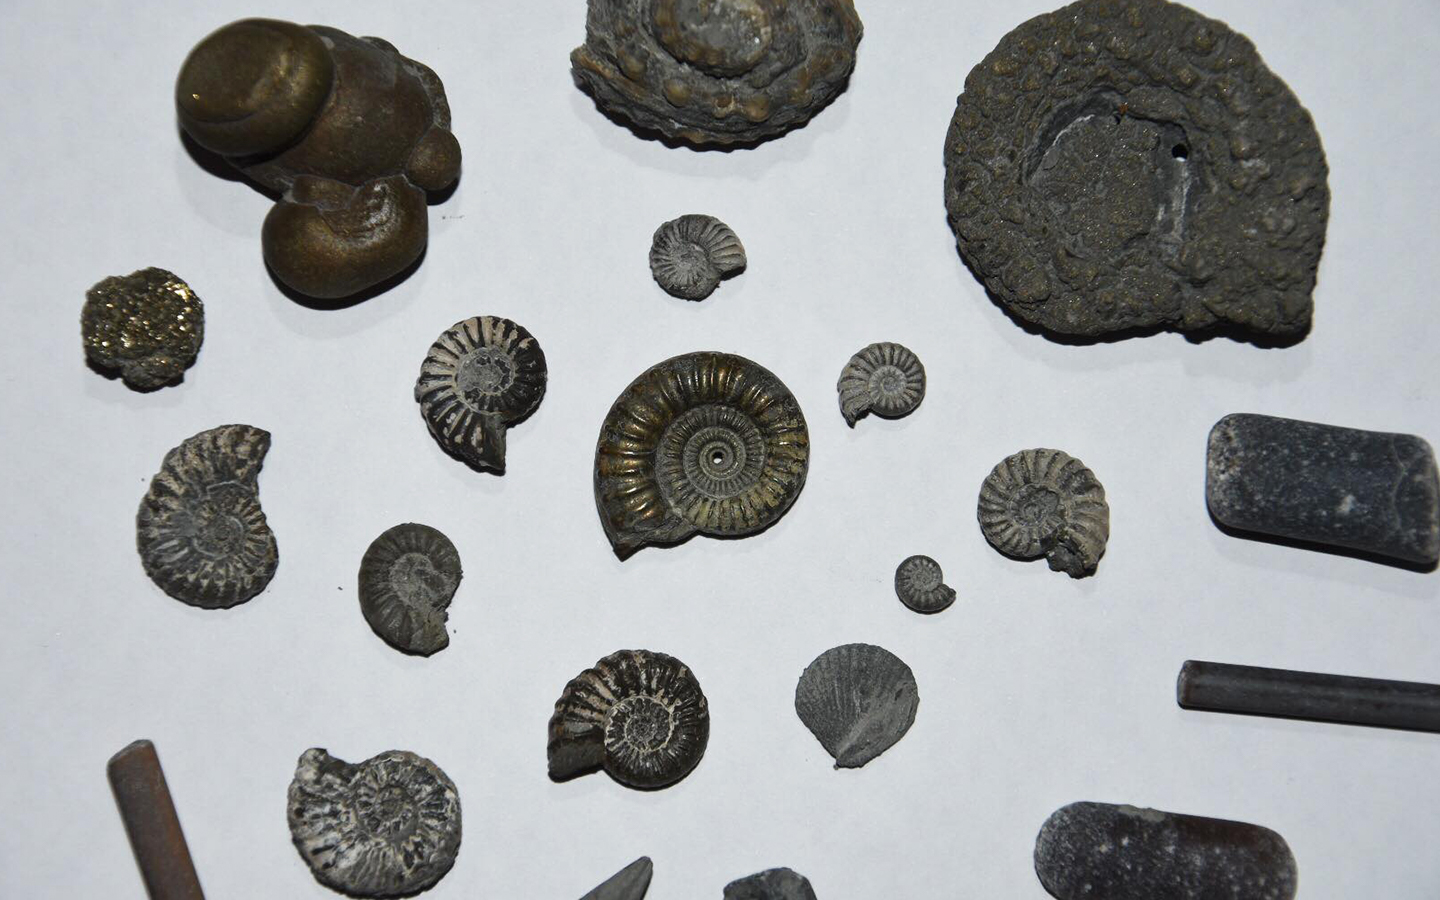 ammonites and belemnites found fossil hunting in charmouth